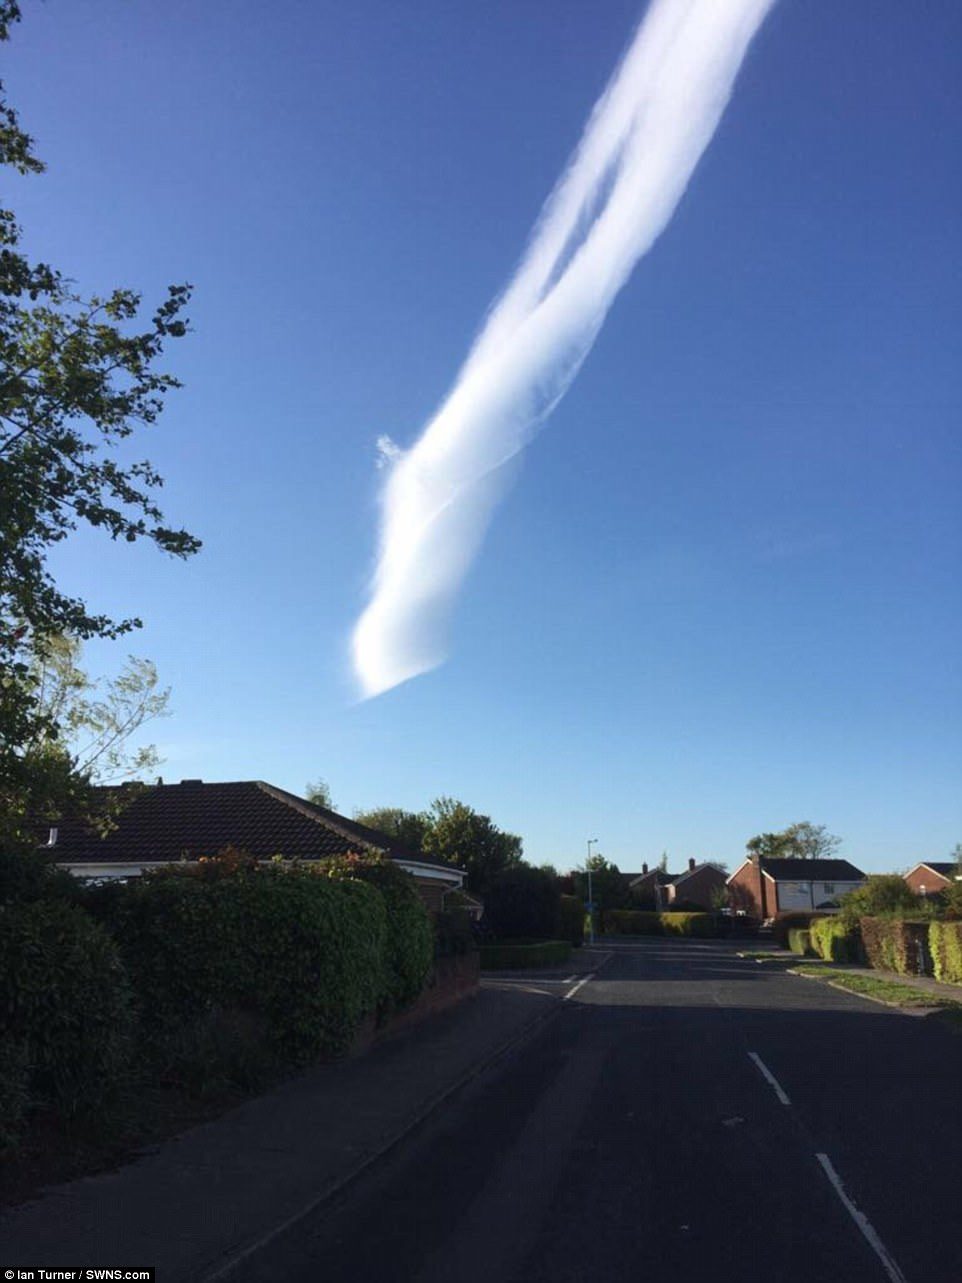 The clearly defined narrow cloud is believed to be cause by the Helm wind - a result of the geograph of the fells - and was seen by thousands of people as it drifted over Cumbria